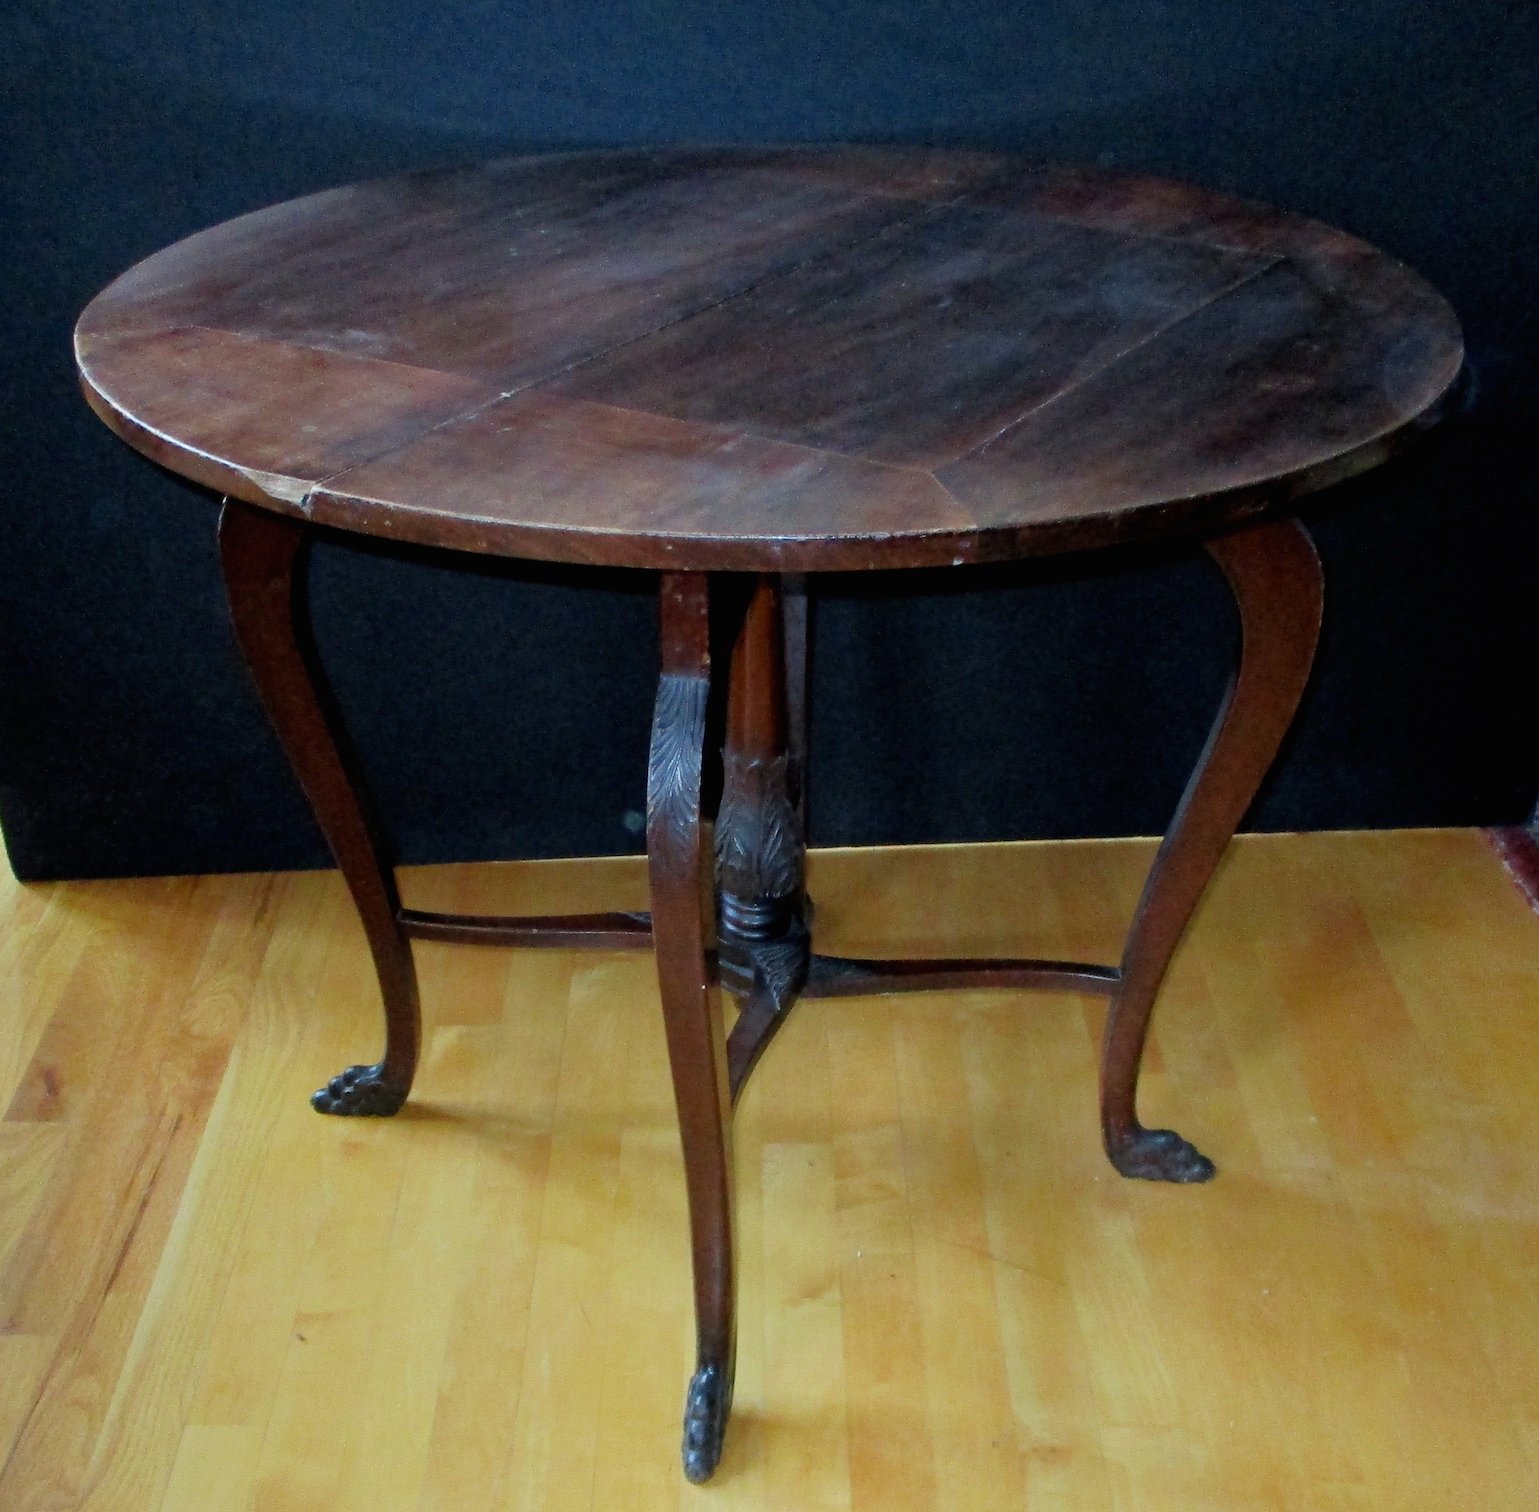 19th Century Mahogany Folding Whist Table (The Whist Table Co. Chicago) - (Unrestored- We can restore to customer's specifications)